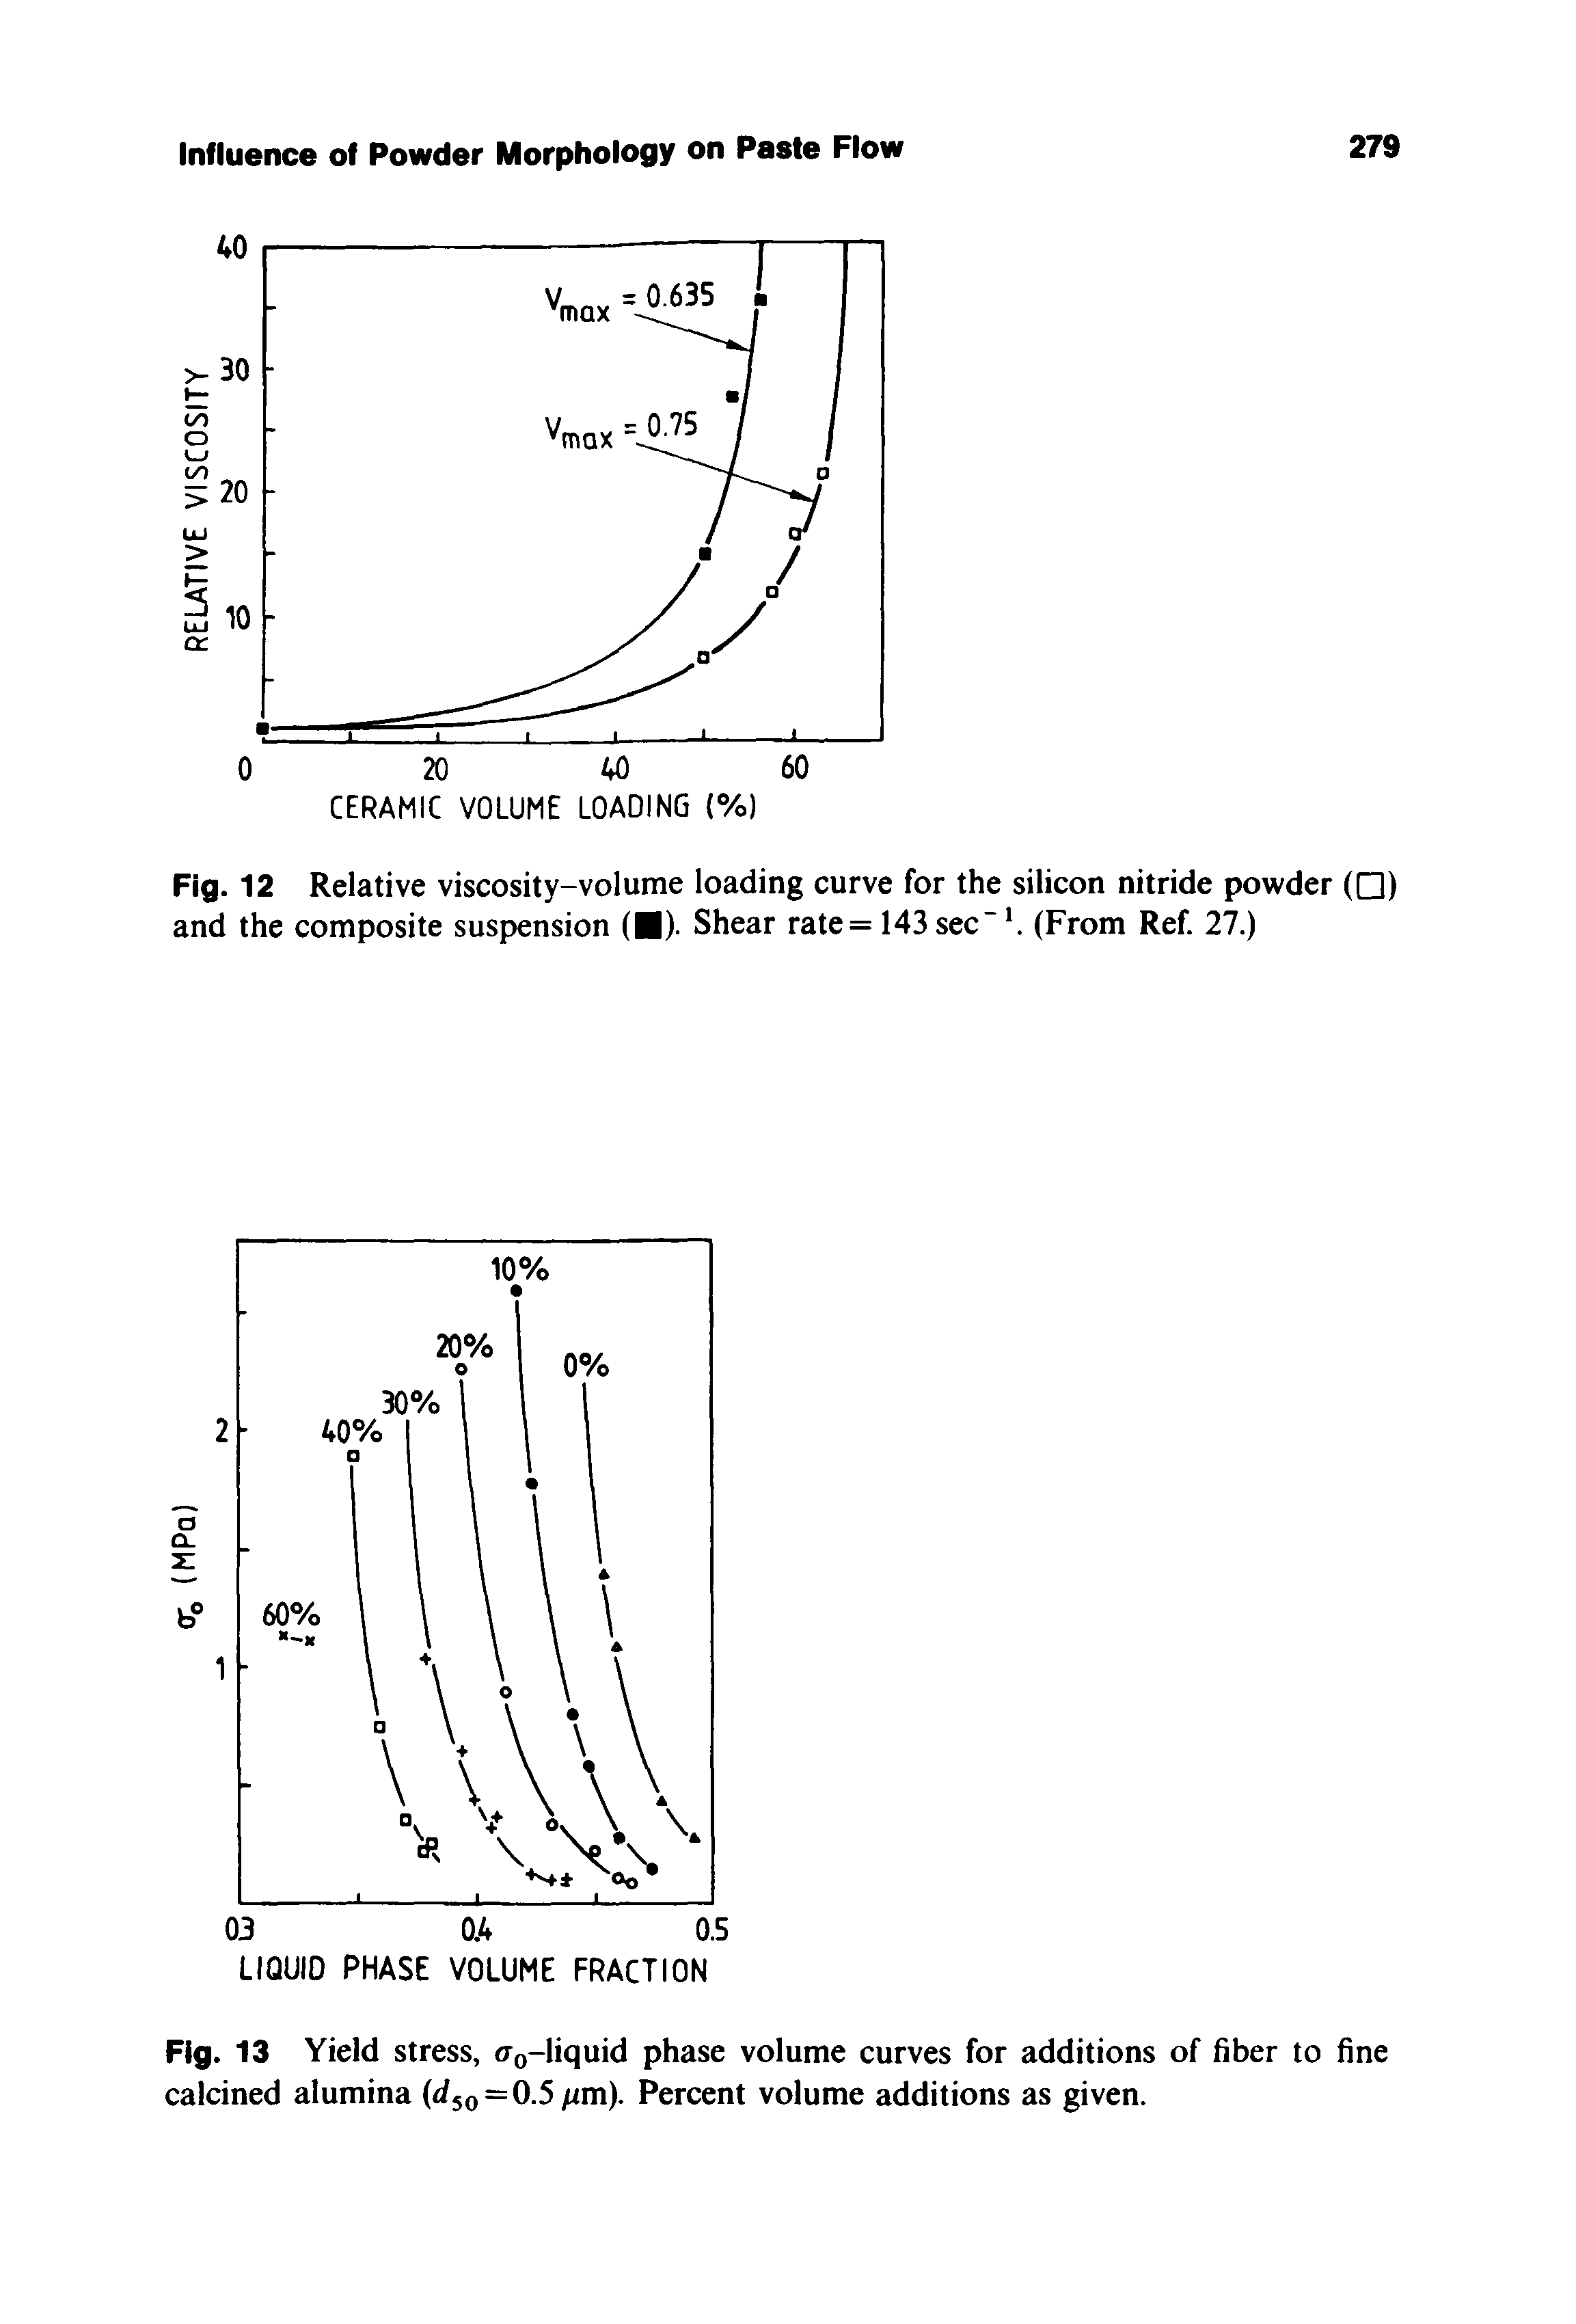 Fig. 12 Relative viscosity-volume loading curve for the silicon nitride powder ( ) and the composite suspension ( ). Shear rate= 143 sec". (From Ref. 27.)...